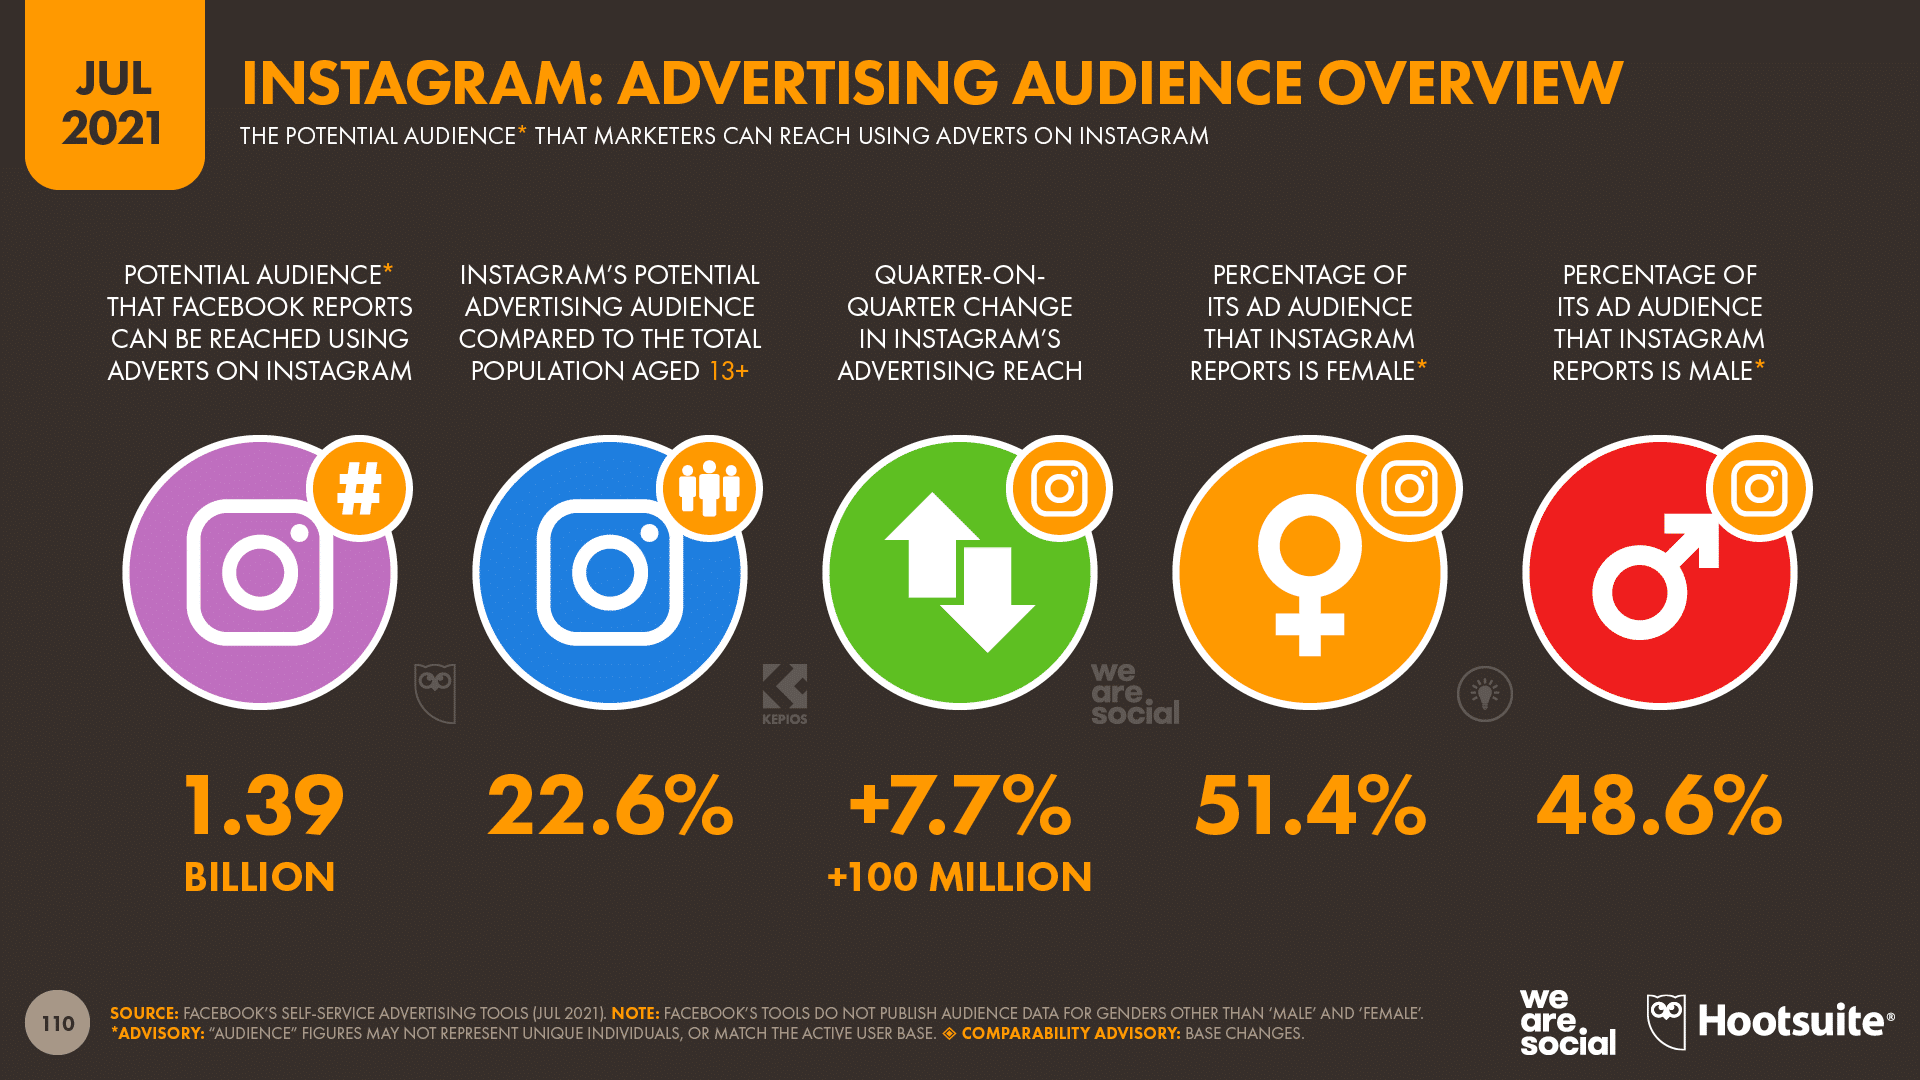 chart showing Instagram advertising audience overview as of July 2021